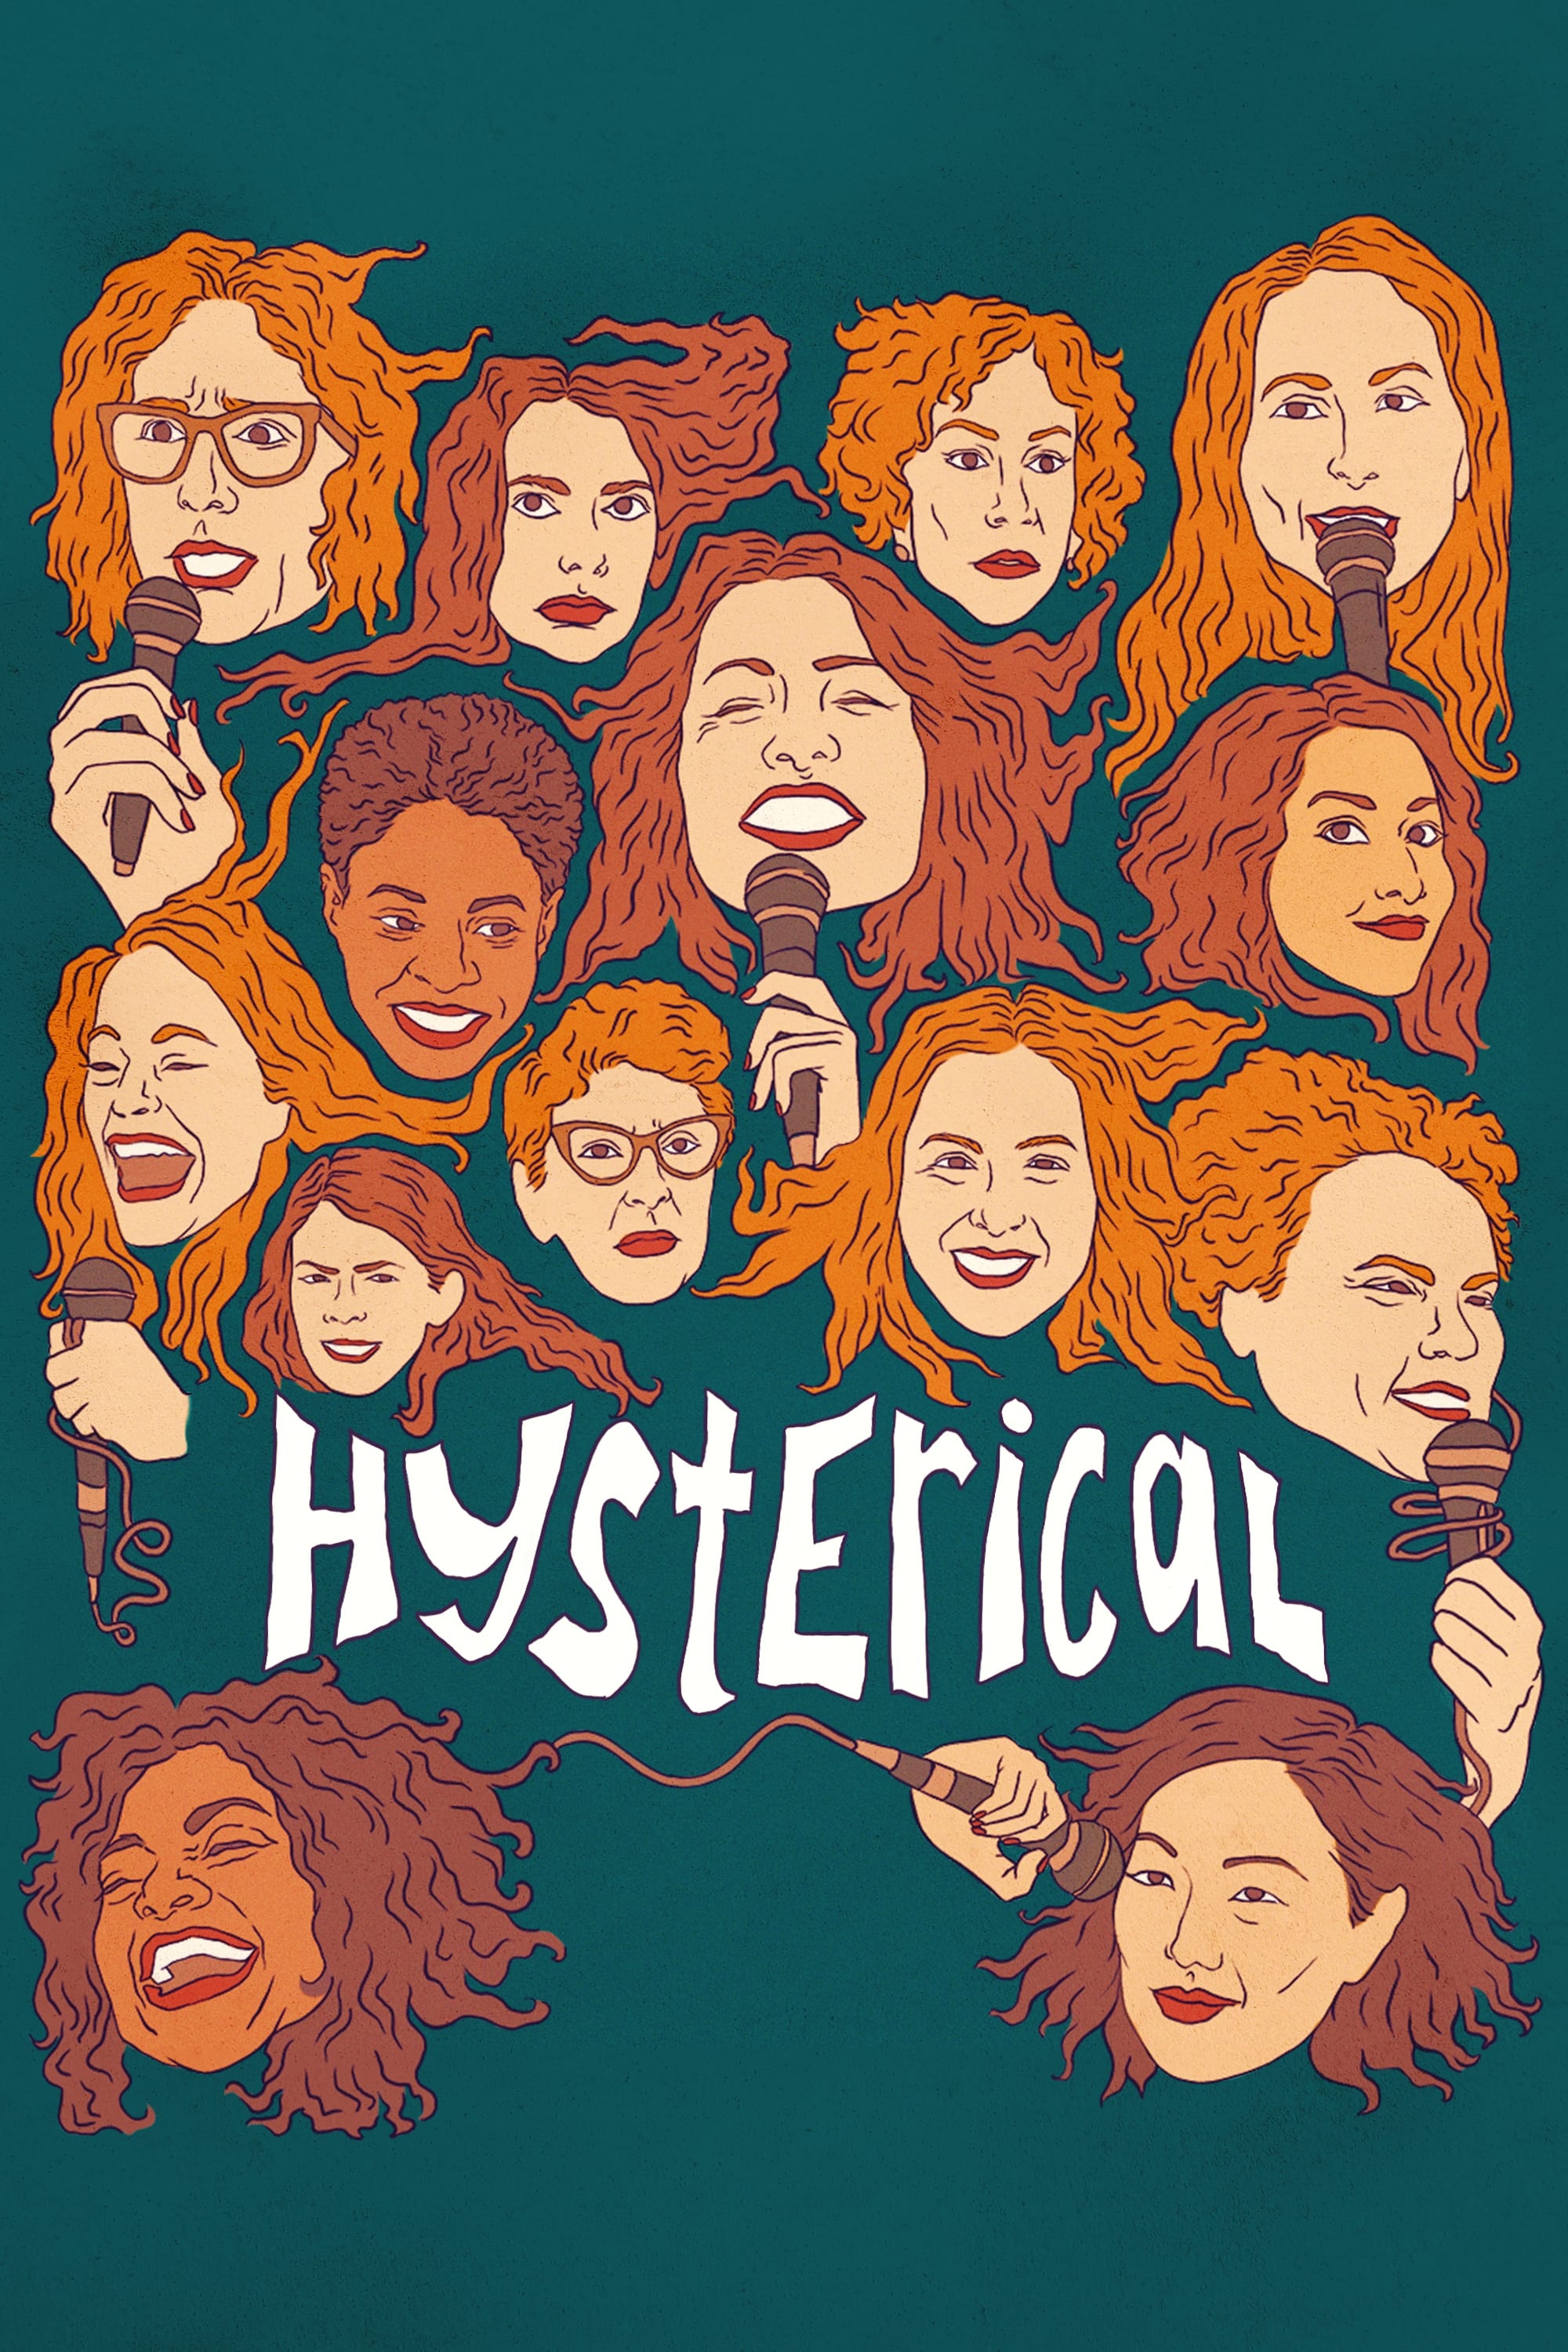 Hysterical (2021)